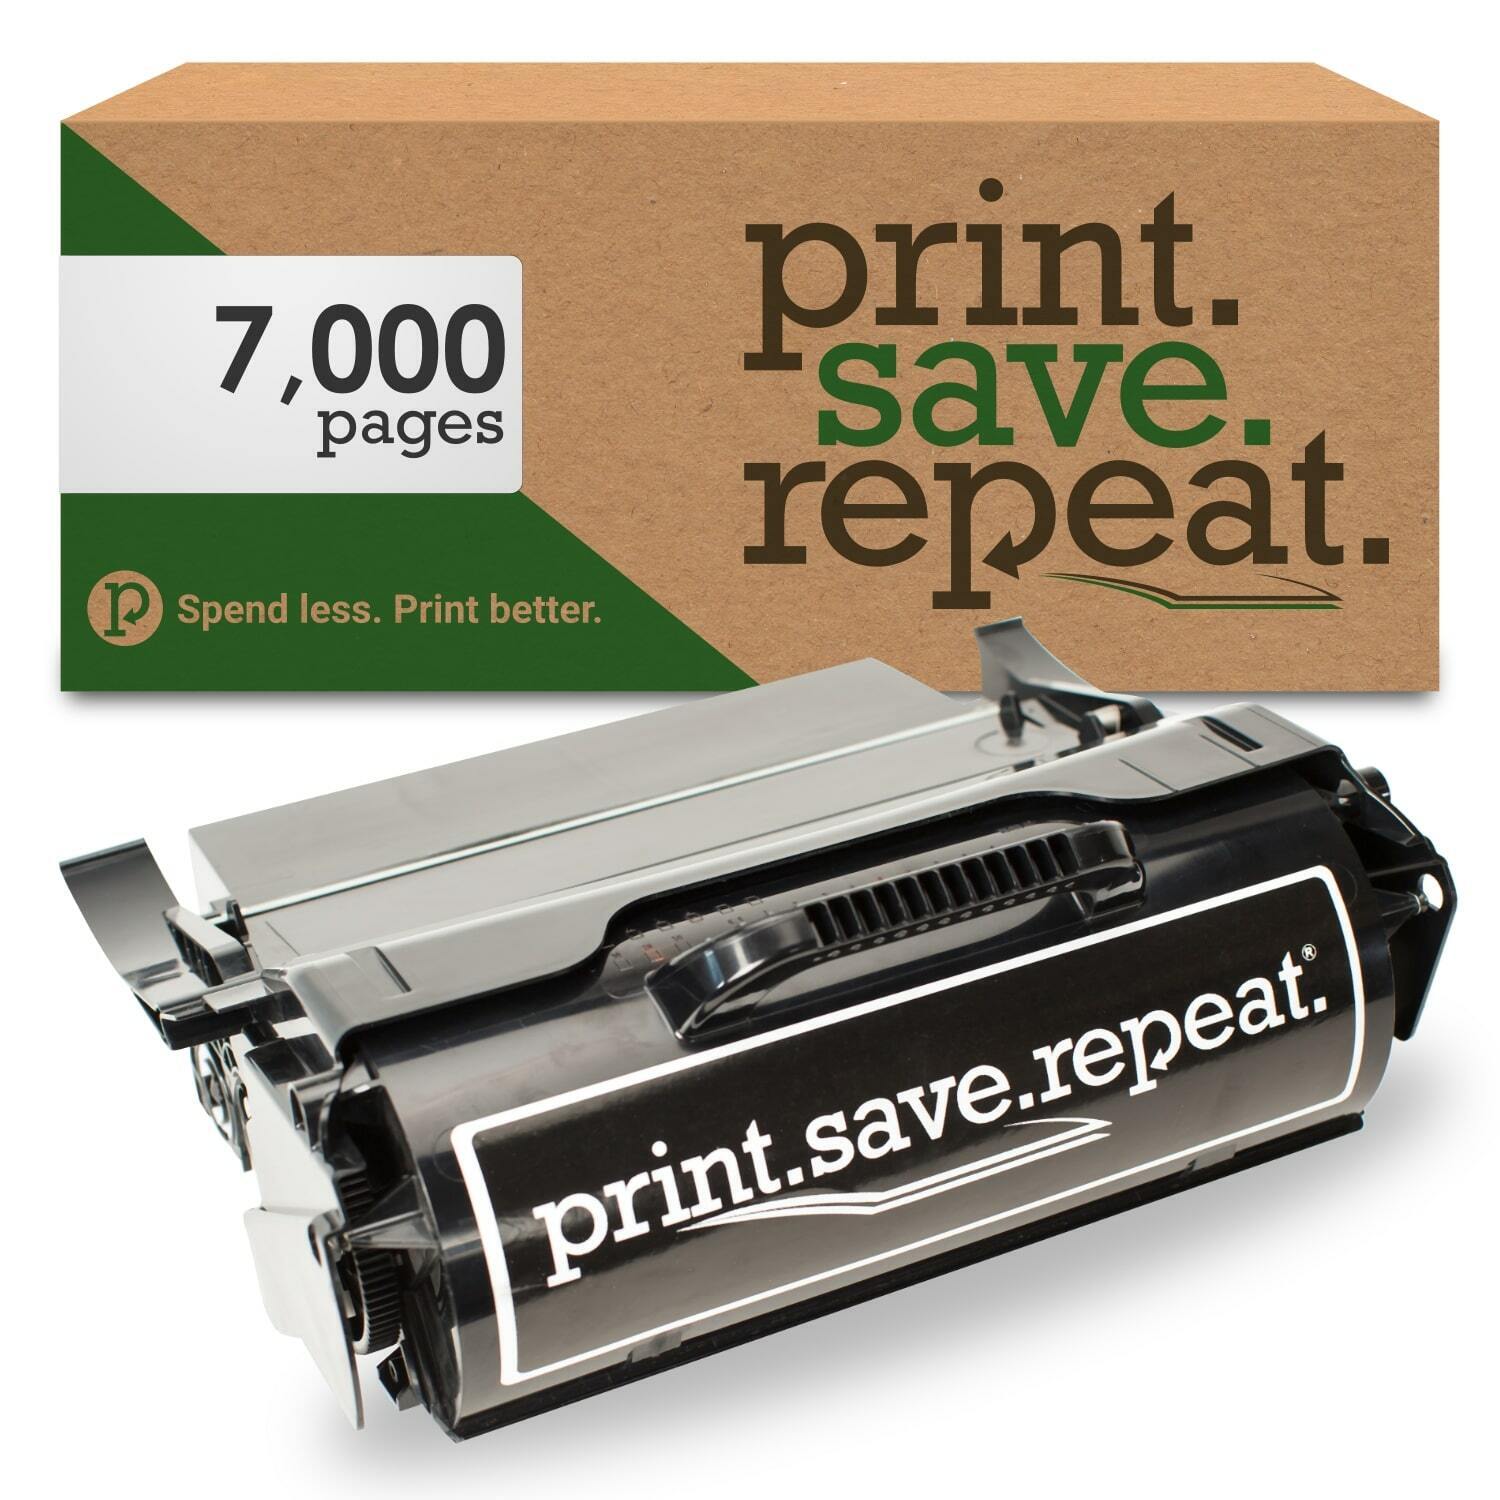 Print.Save.Repeat. Lexmark T650A11A Toner Cartridge for T650, T652, T654, T656